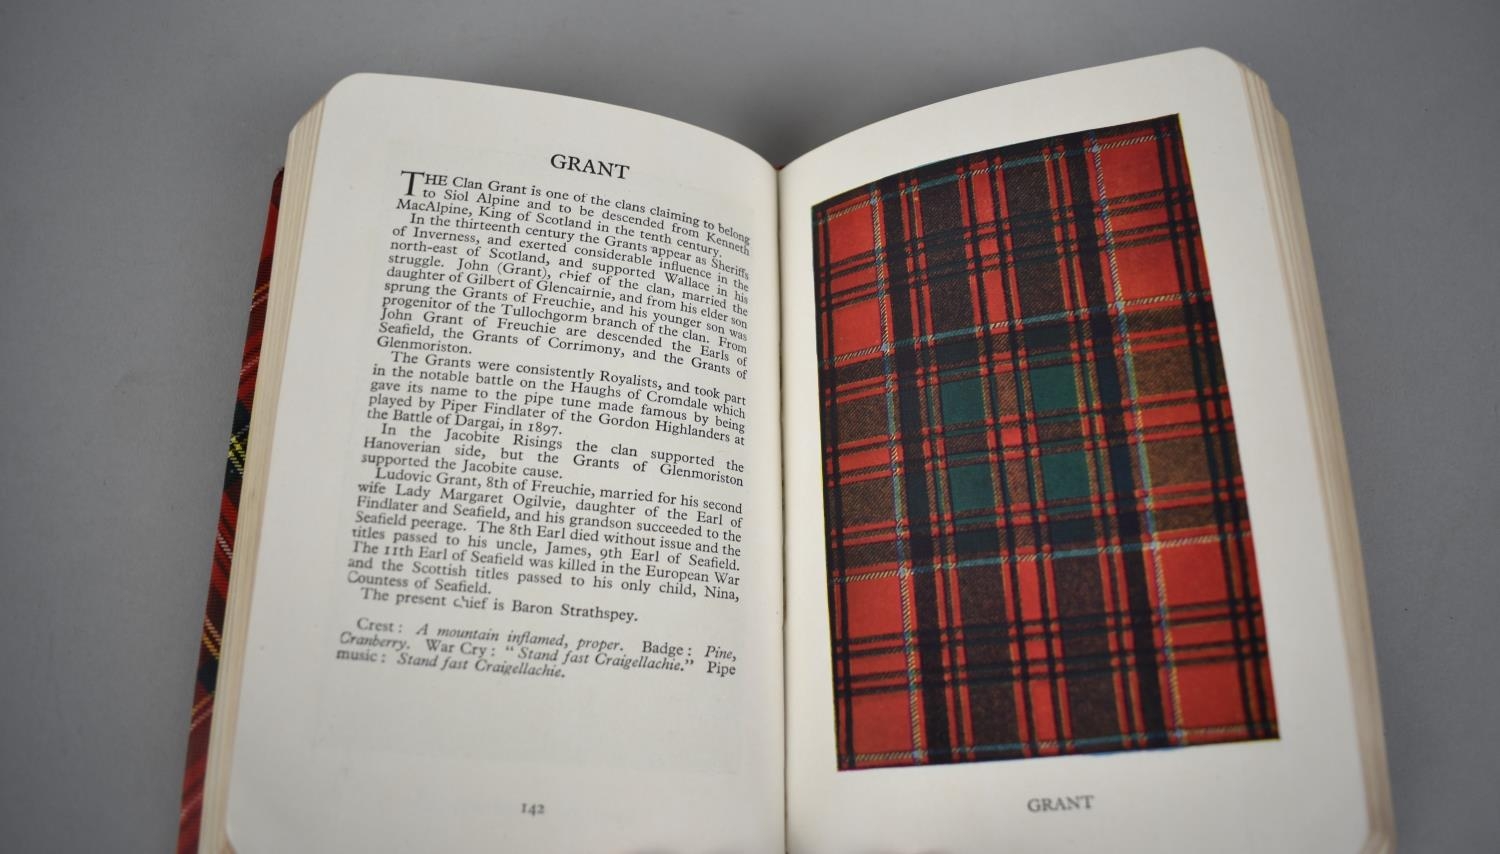 A Mid 20th Century Bound Volume, The Clans and Tartans of Scotland by Robert Bain, Published by - Image 3 of 4